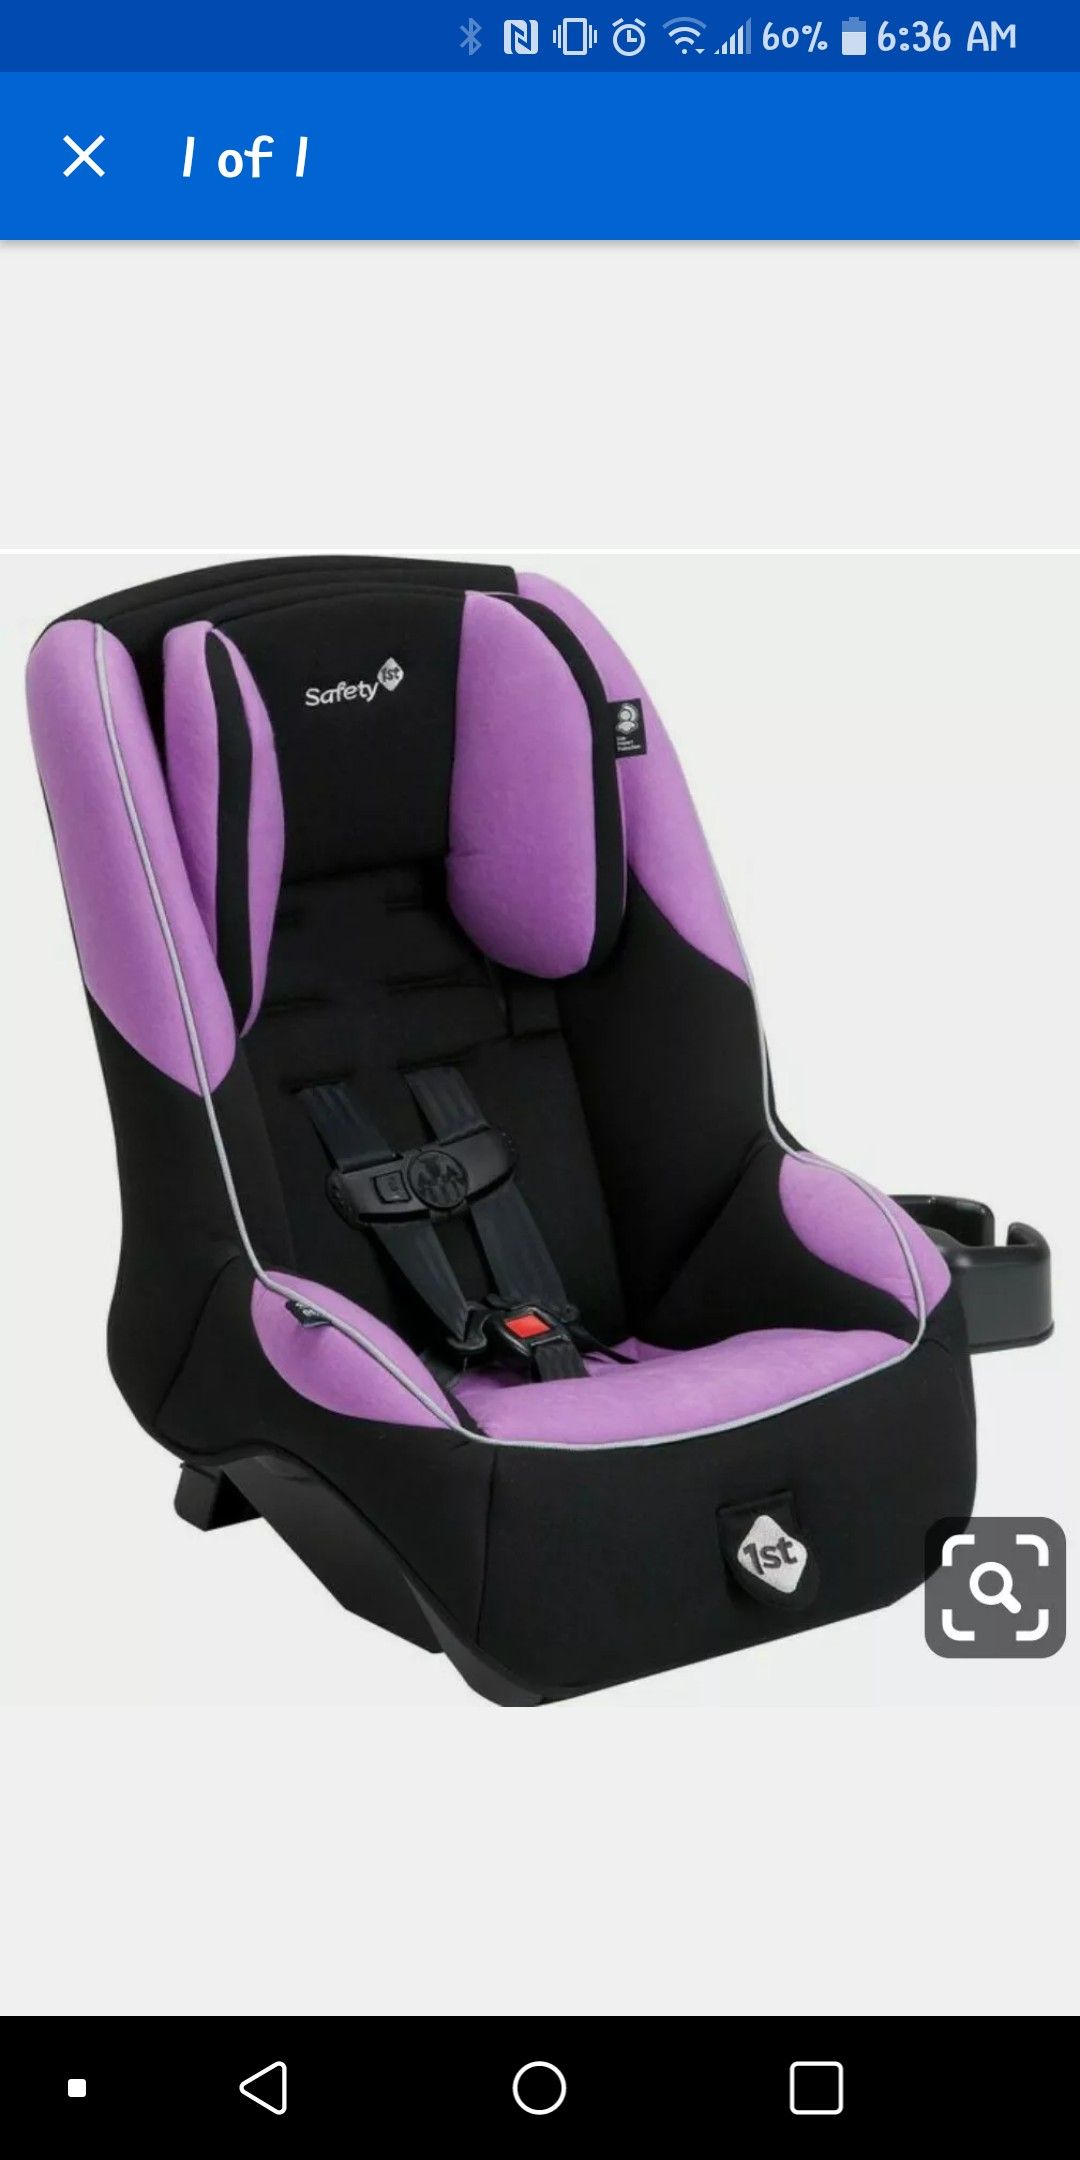 Safety 1st Guide 65 Convertible Car Seat, purple